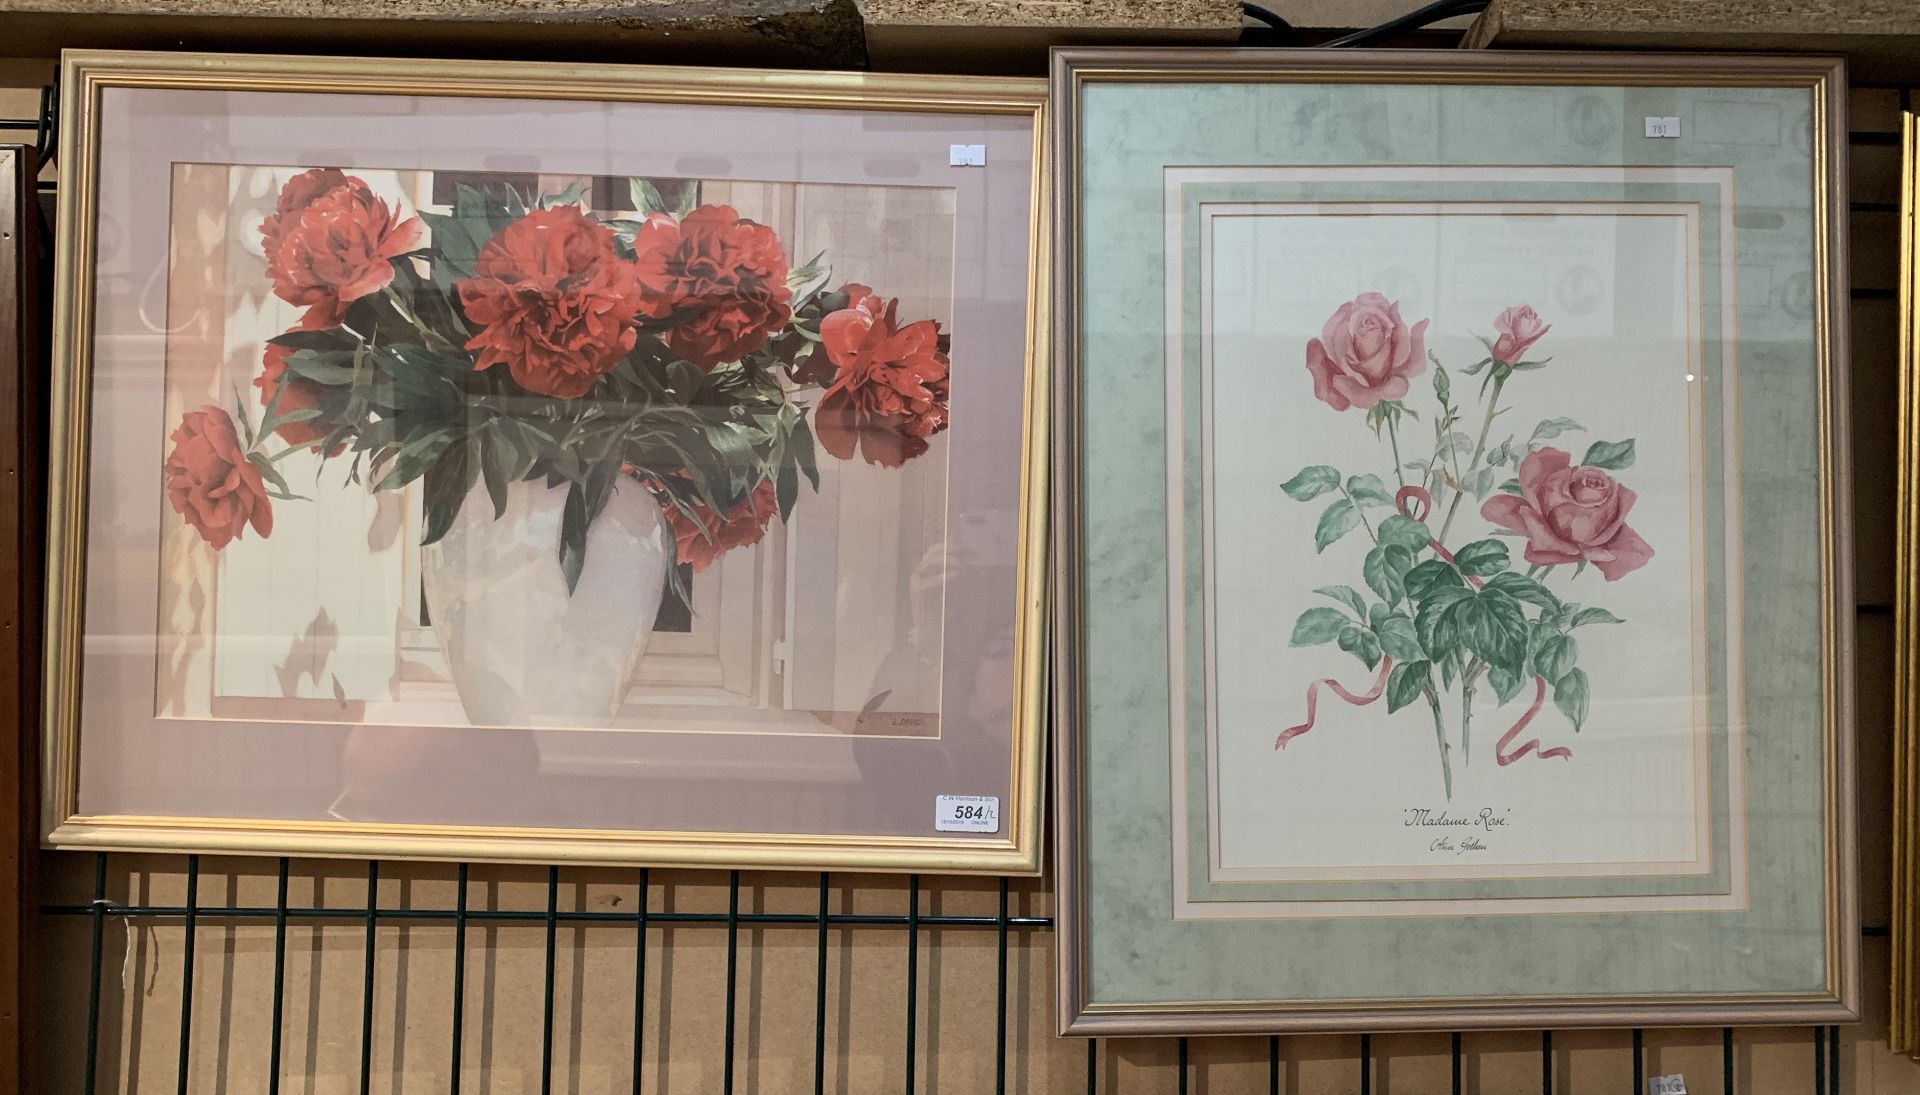 Two framed floral prints - carnations and roses